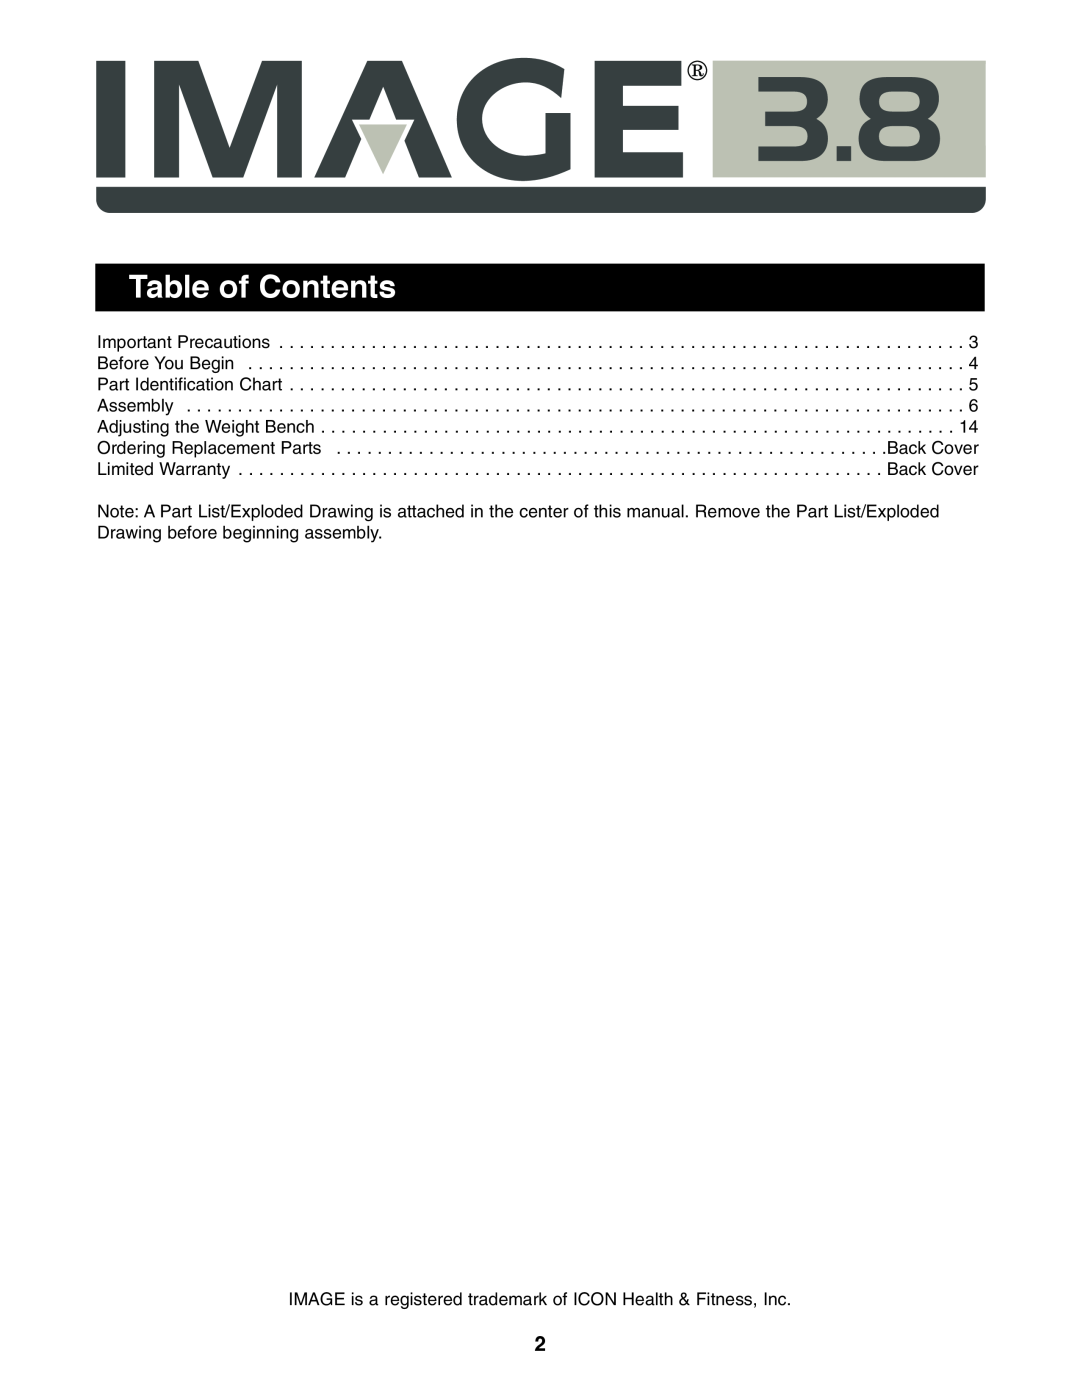 Image 3.8 user manual Table of Contents 